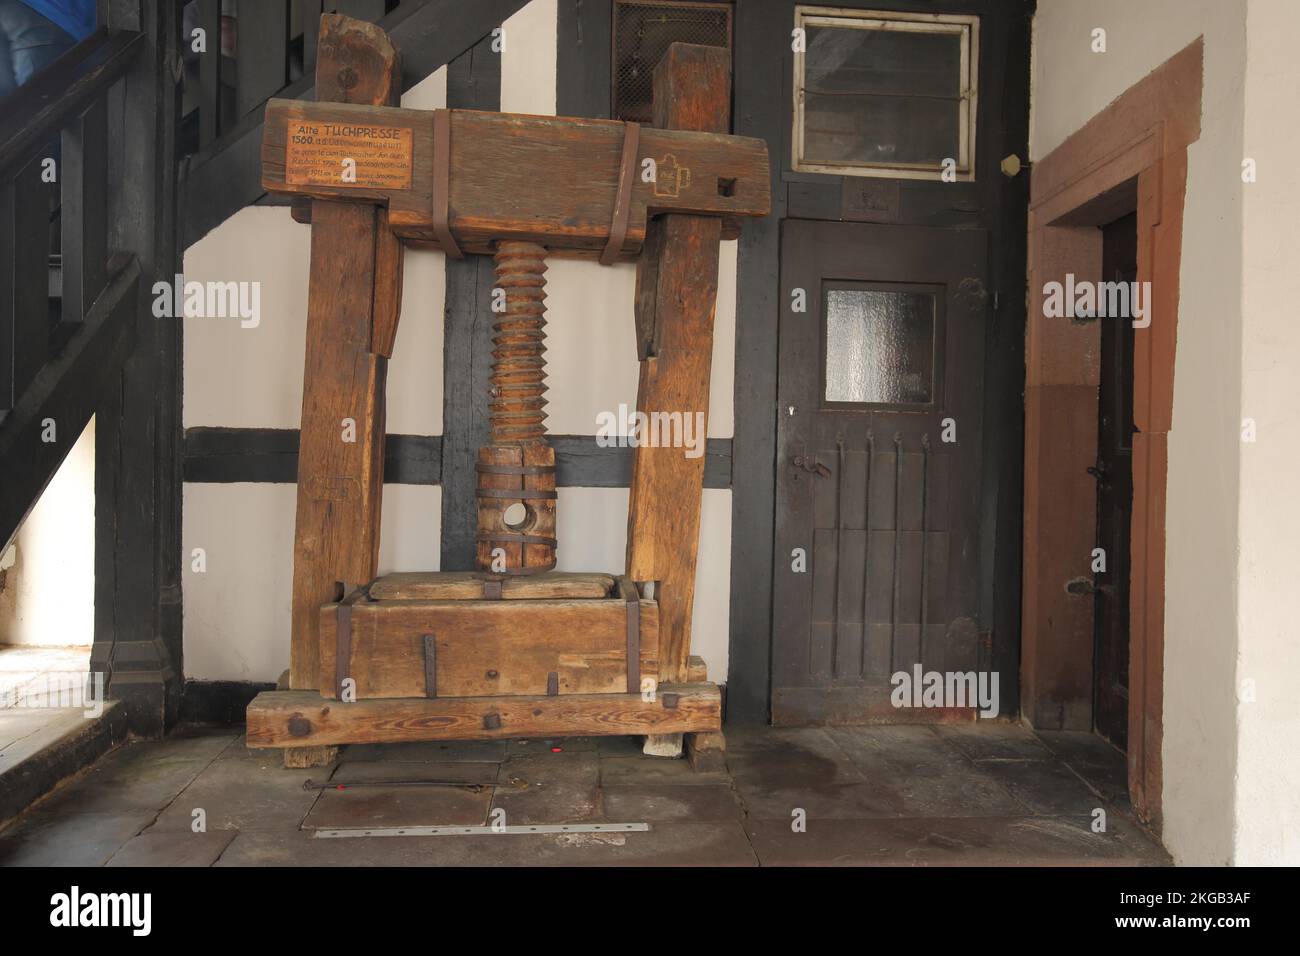 Historic cloth press at the town hall in Michelstadt, Hesse, Germany, Europe Stock Photo